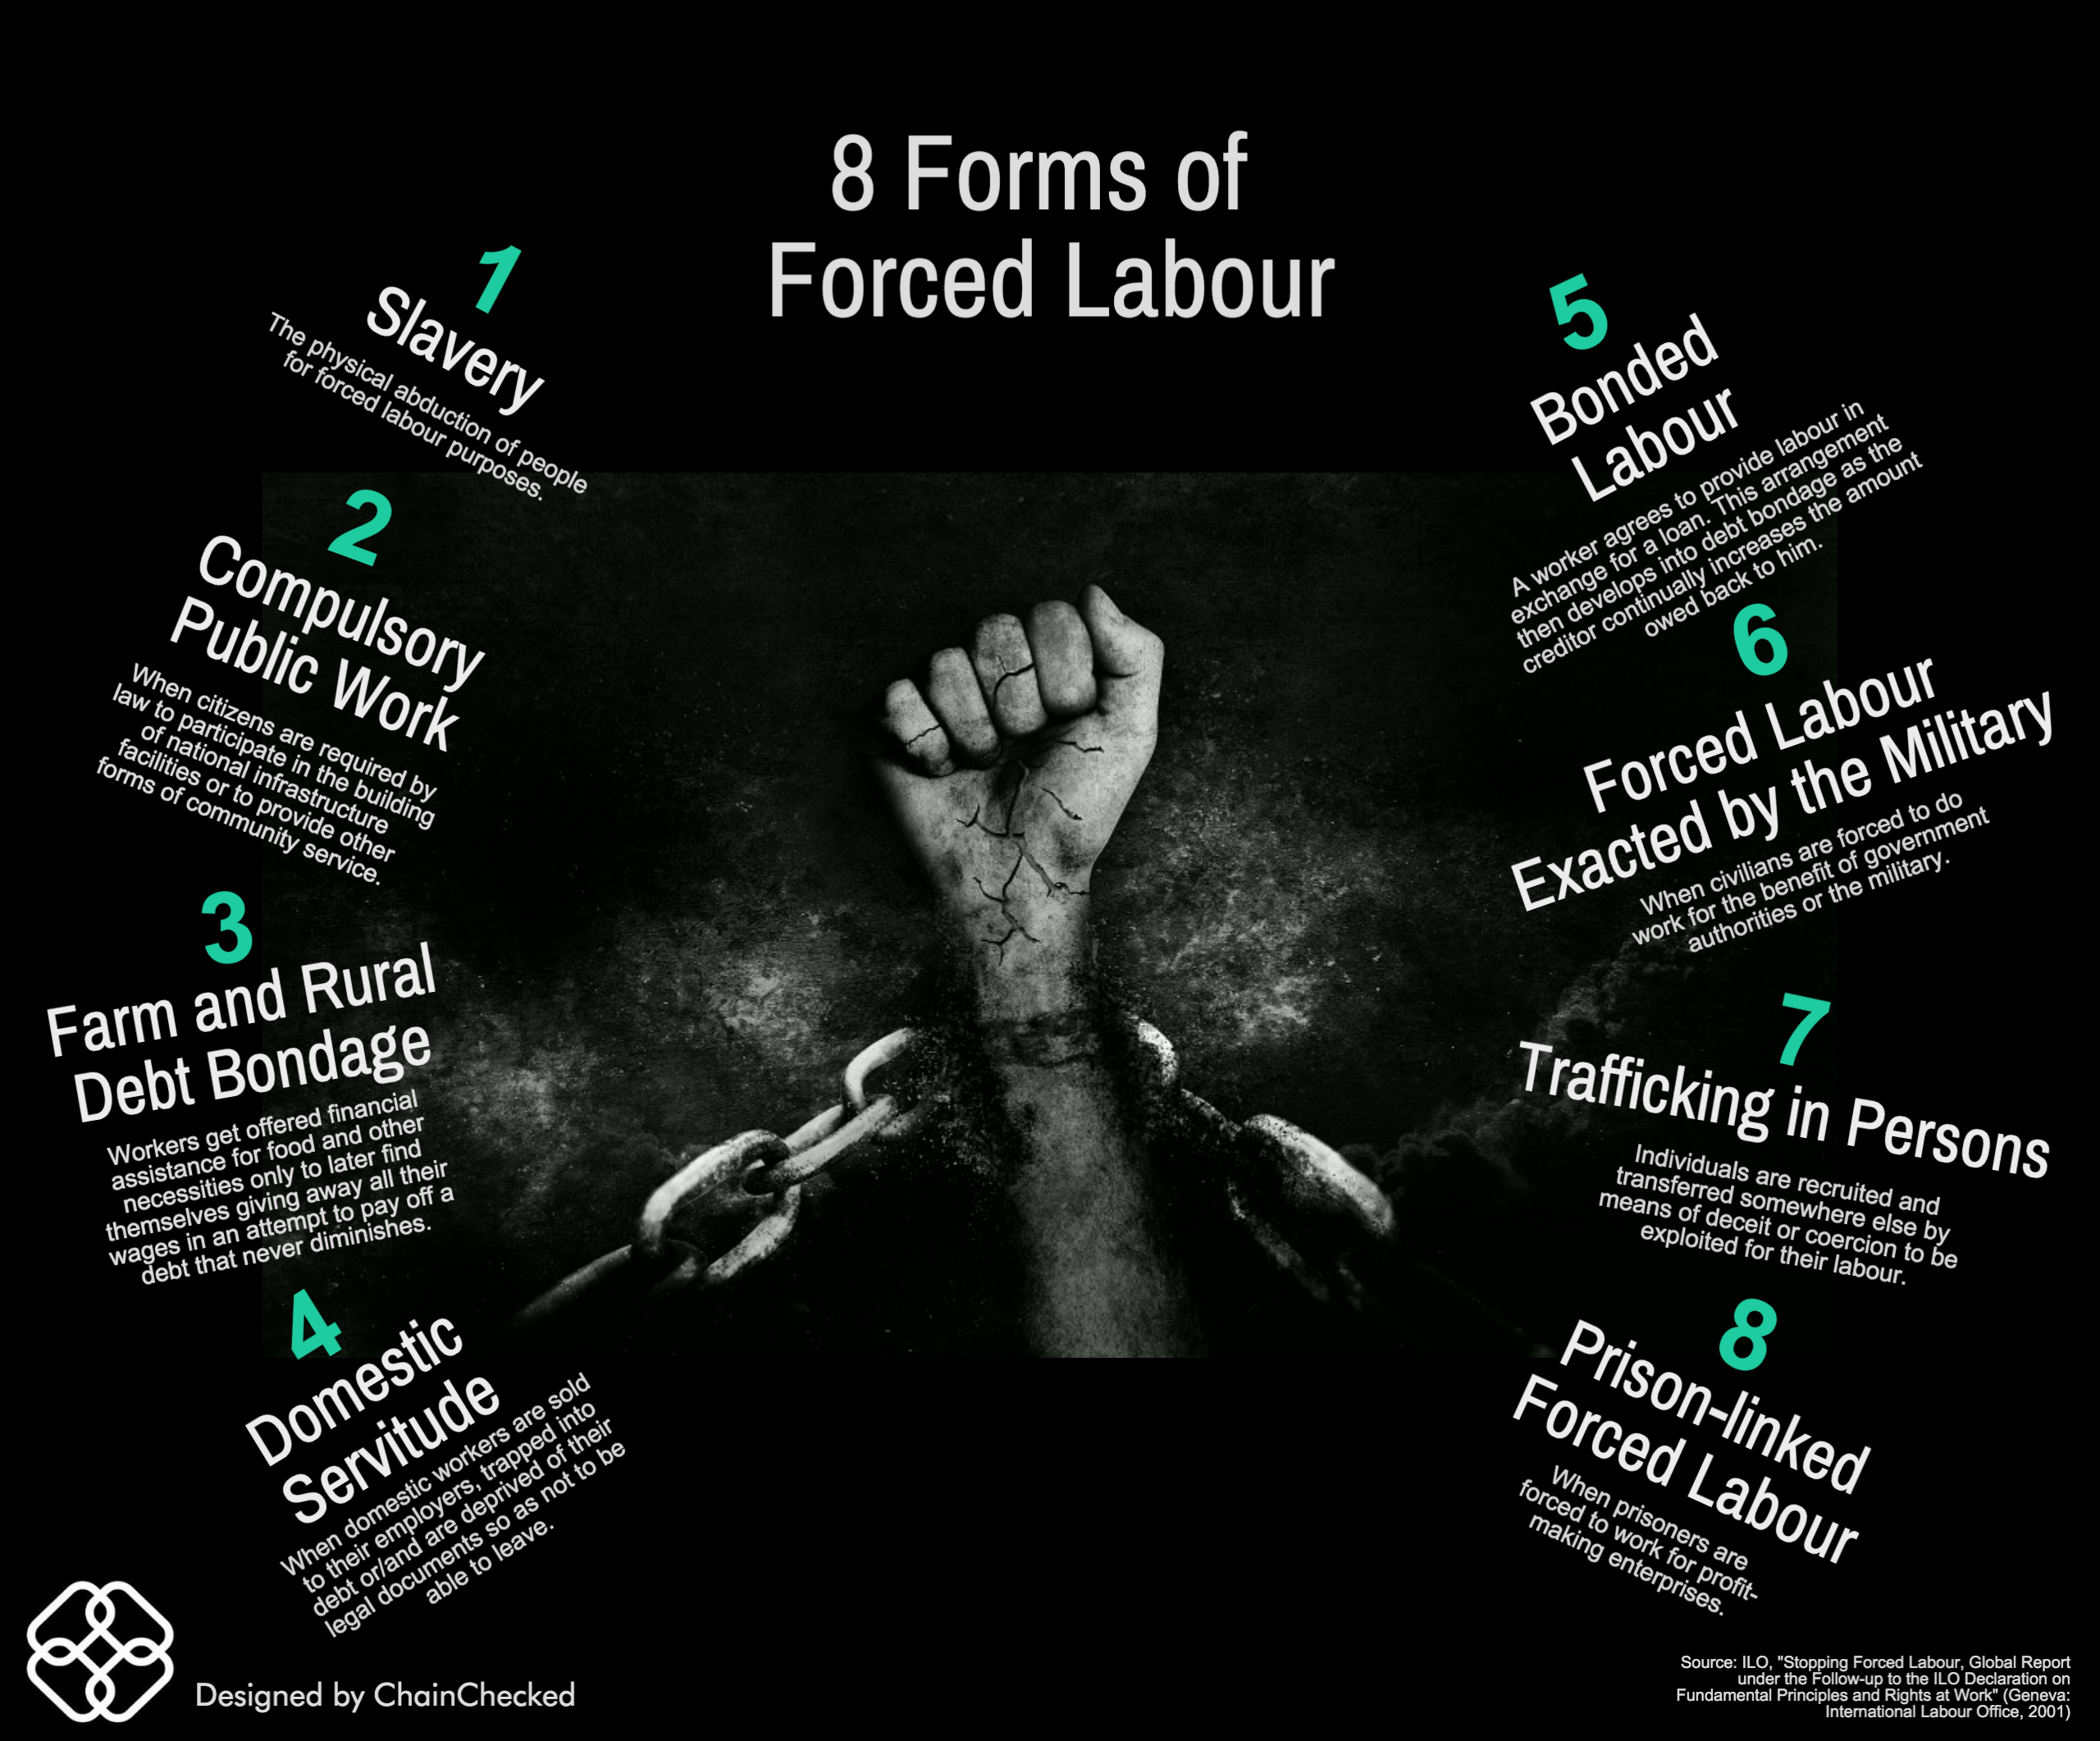 Forced labour